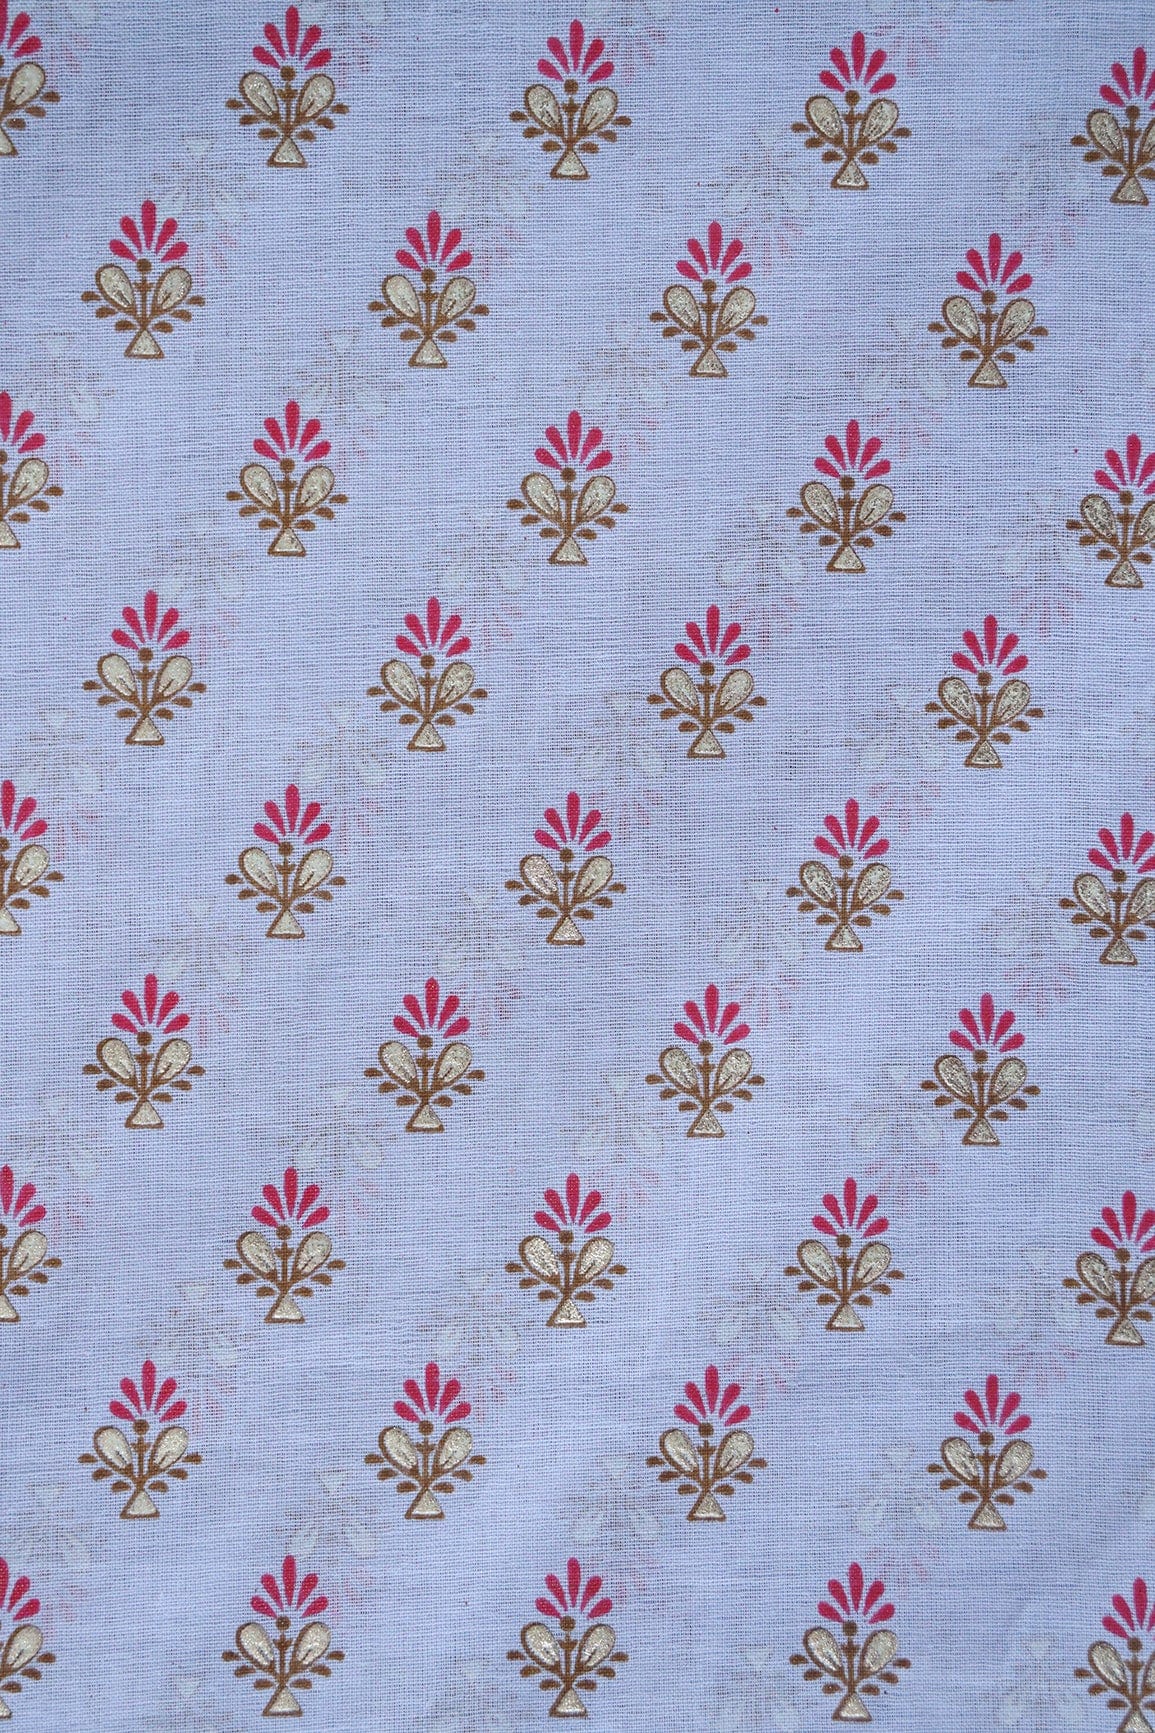 doeraa Prints Dark Pink And Brown Small Floral Booti Foil Print On Pastel Blue Organic Cotton Fabric